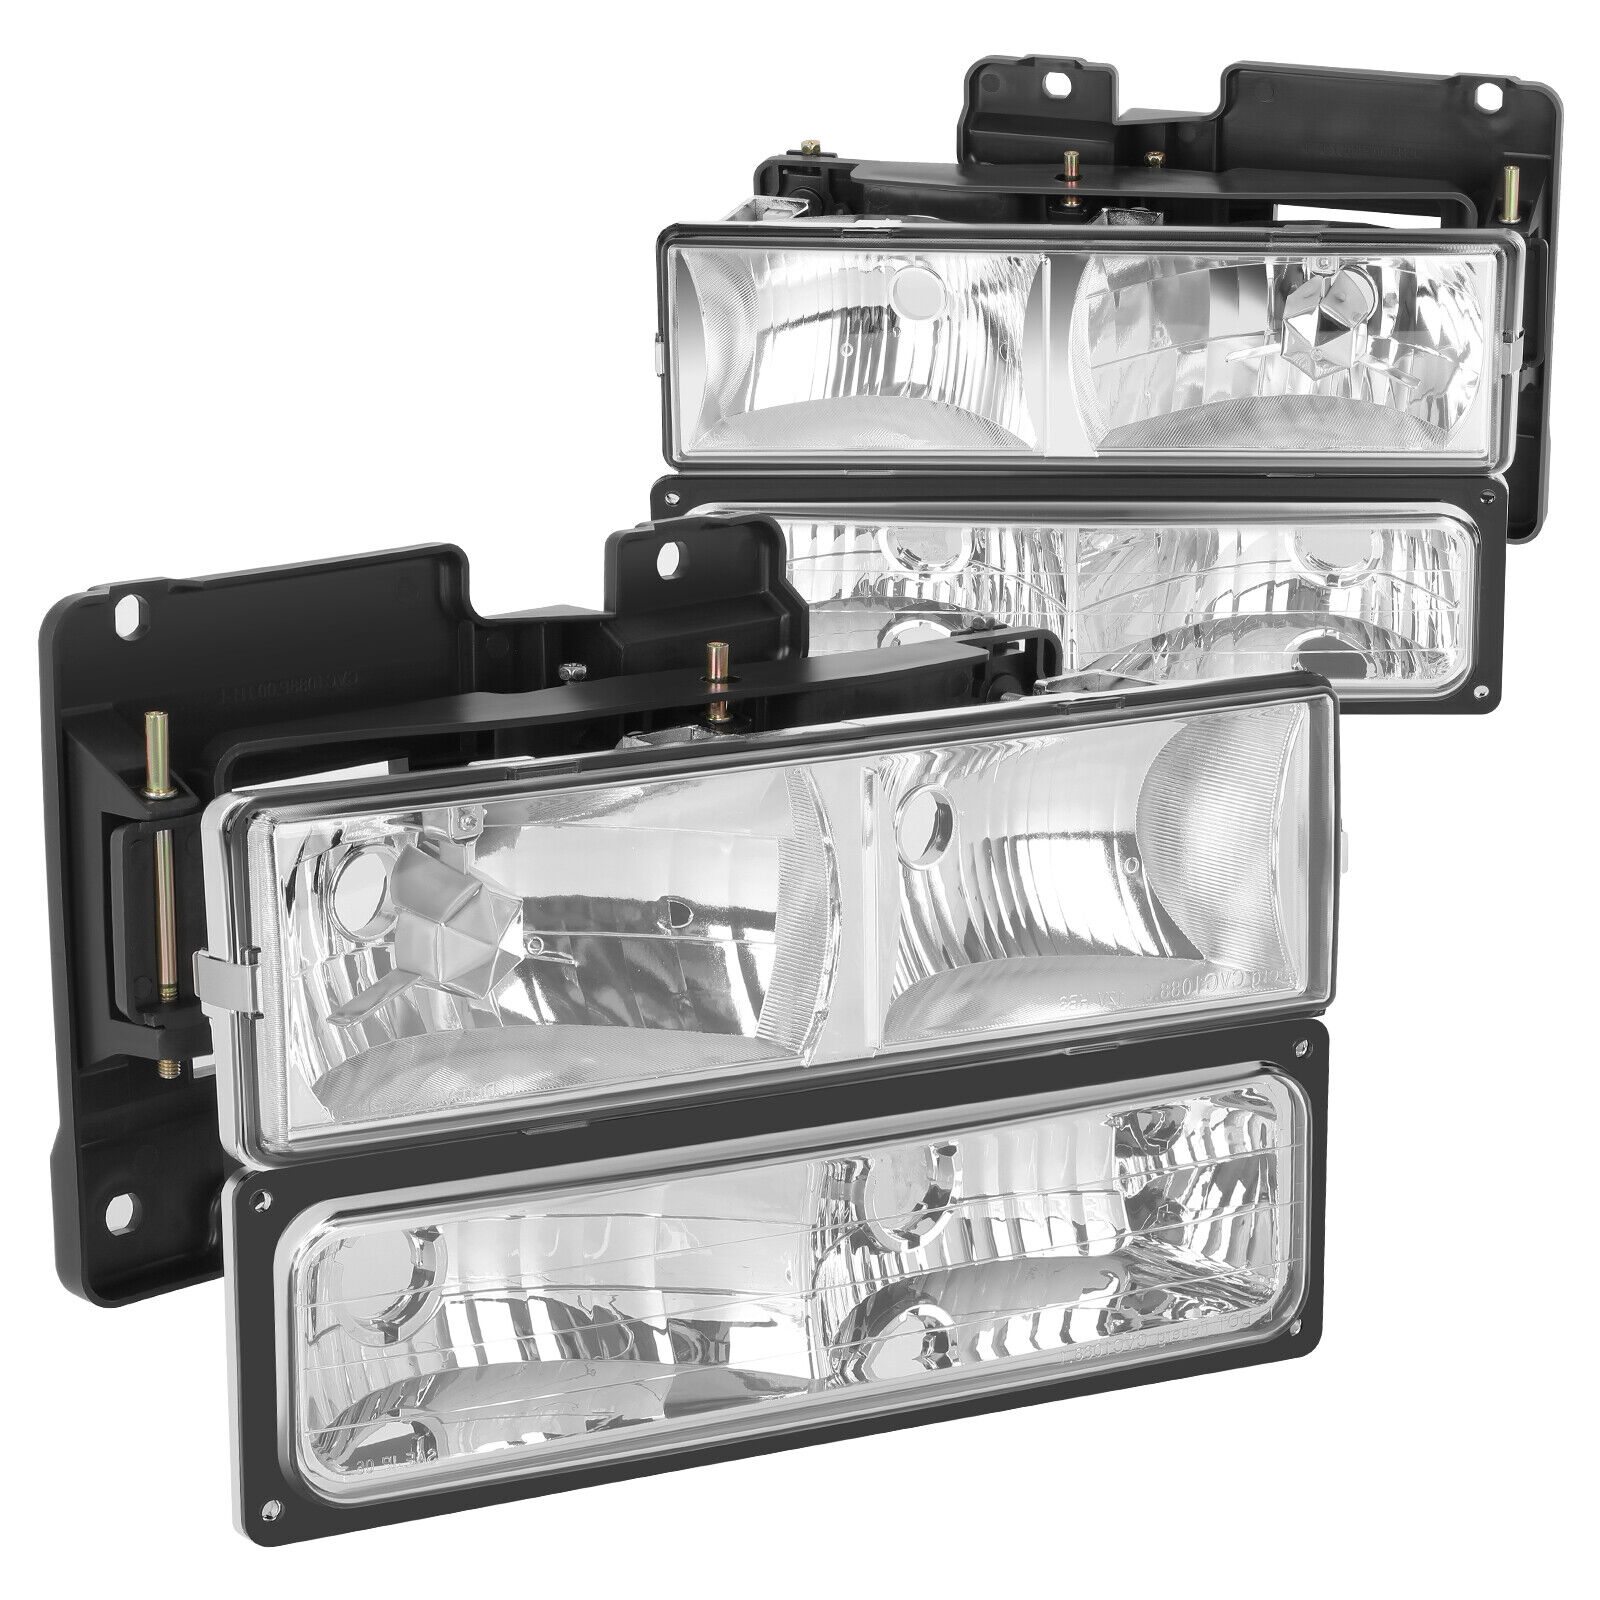 For Chevy C/K C10 1500 2500 1988 1989 1990 1991 1992 1993 Headlights Assembly